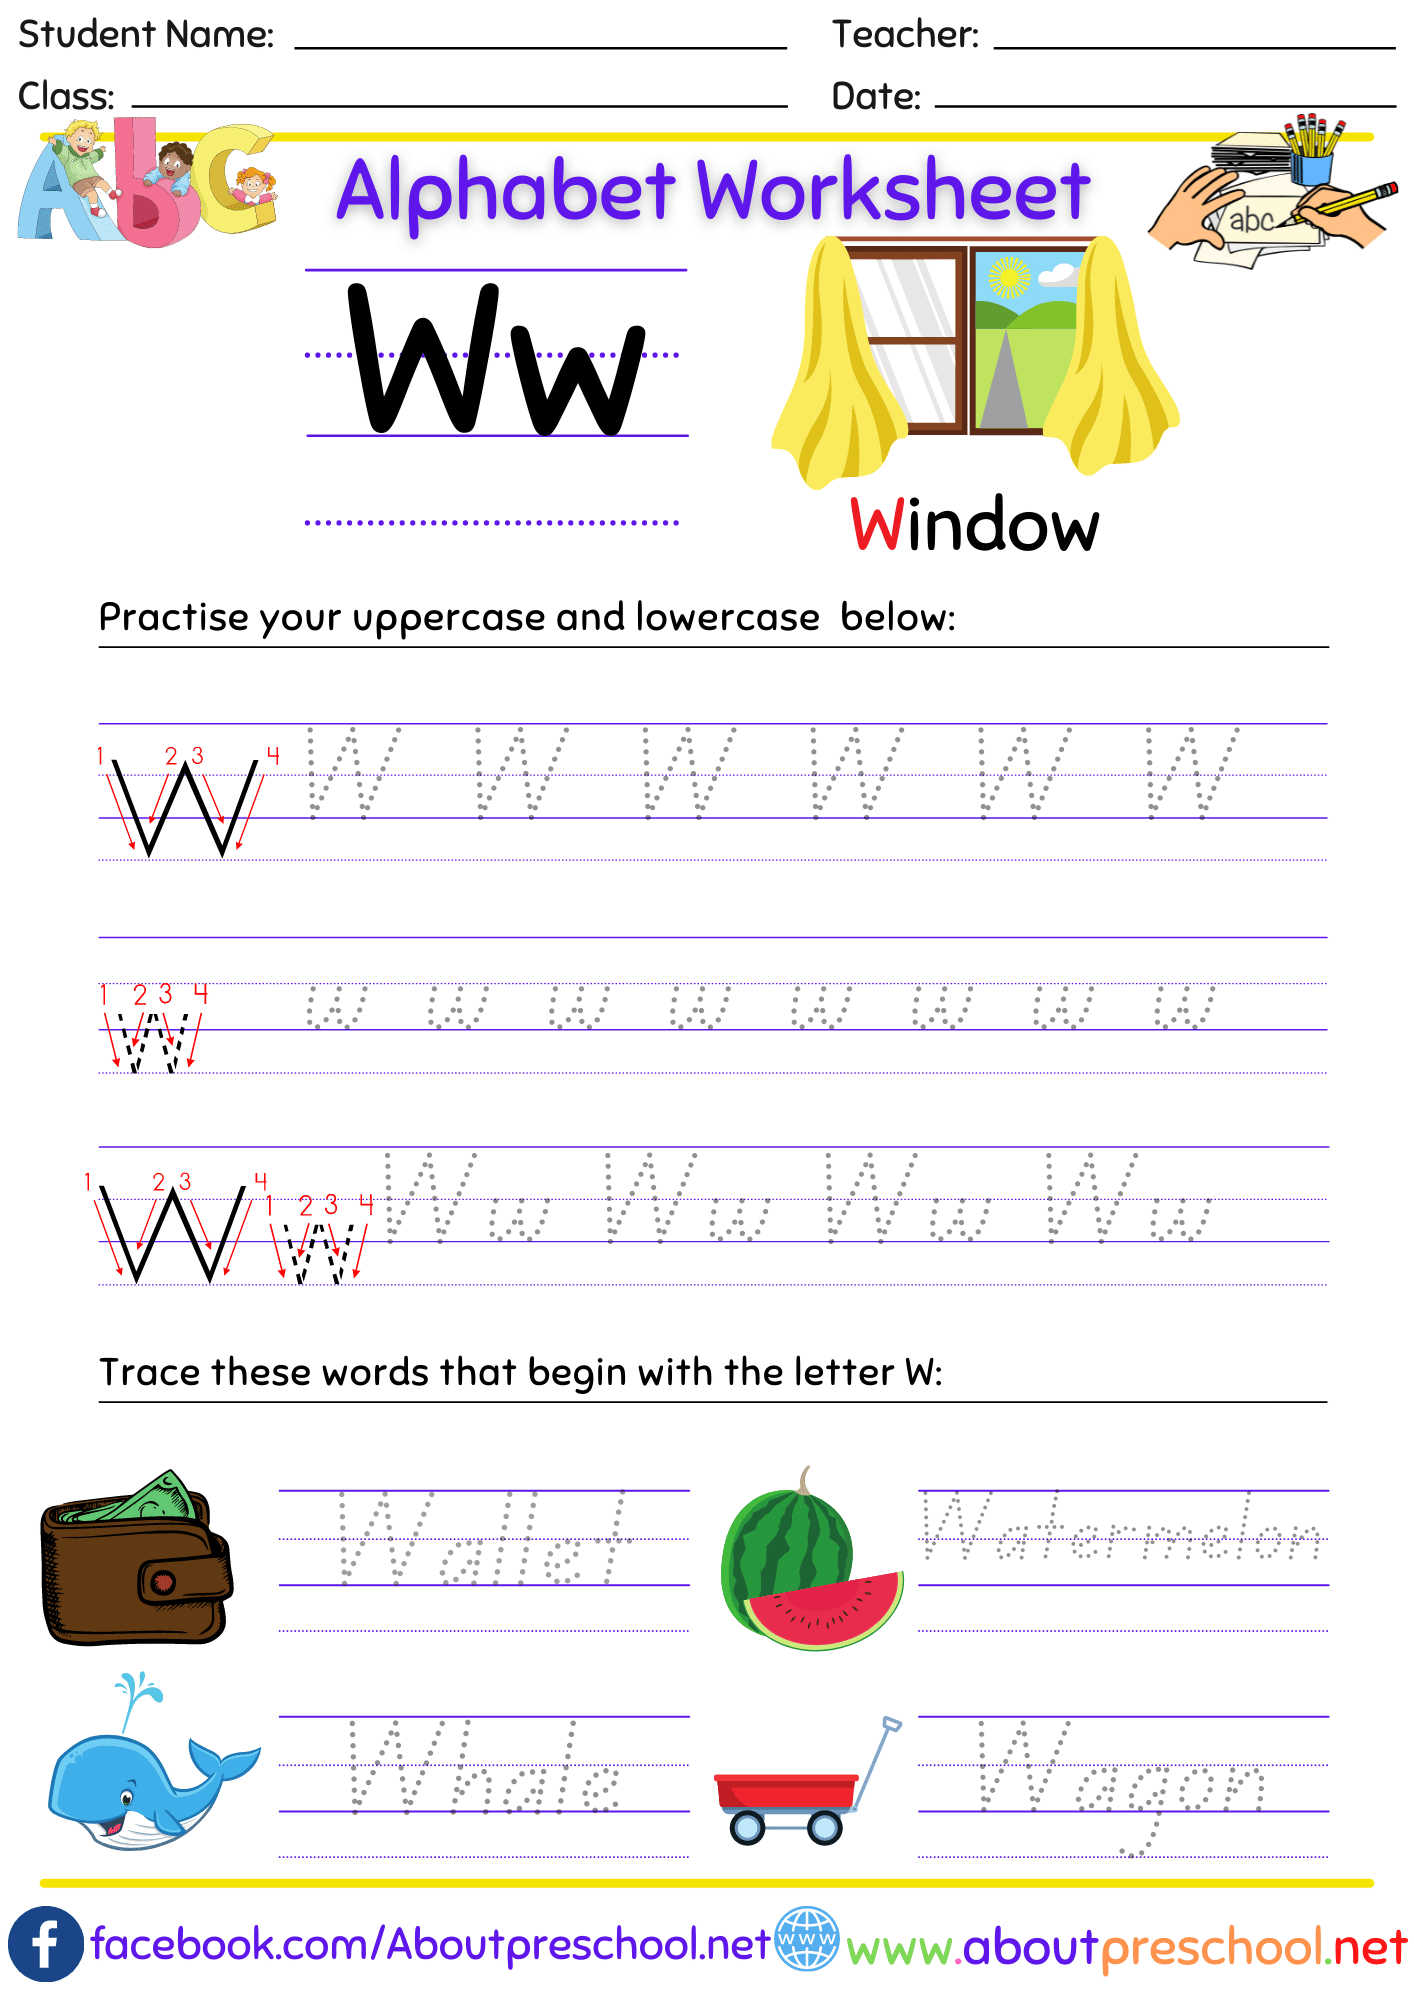 The Alphabet Worksheets-W